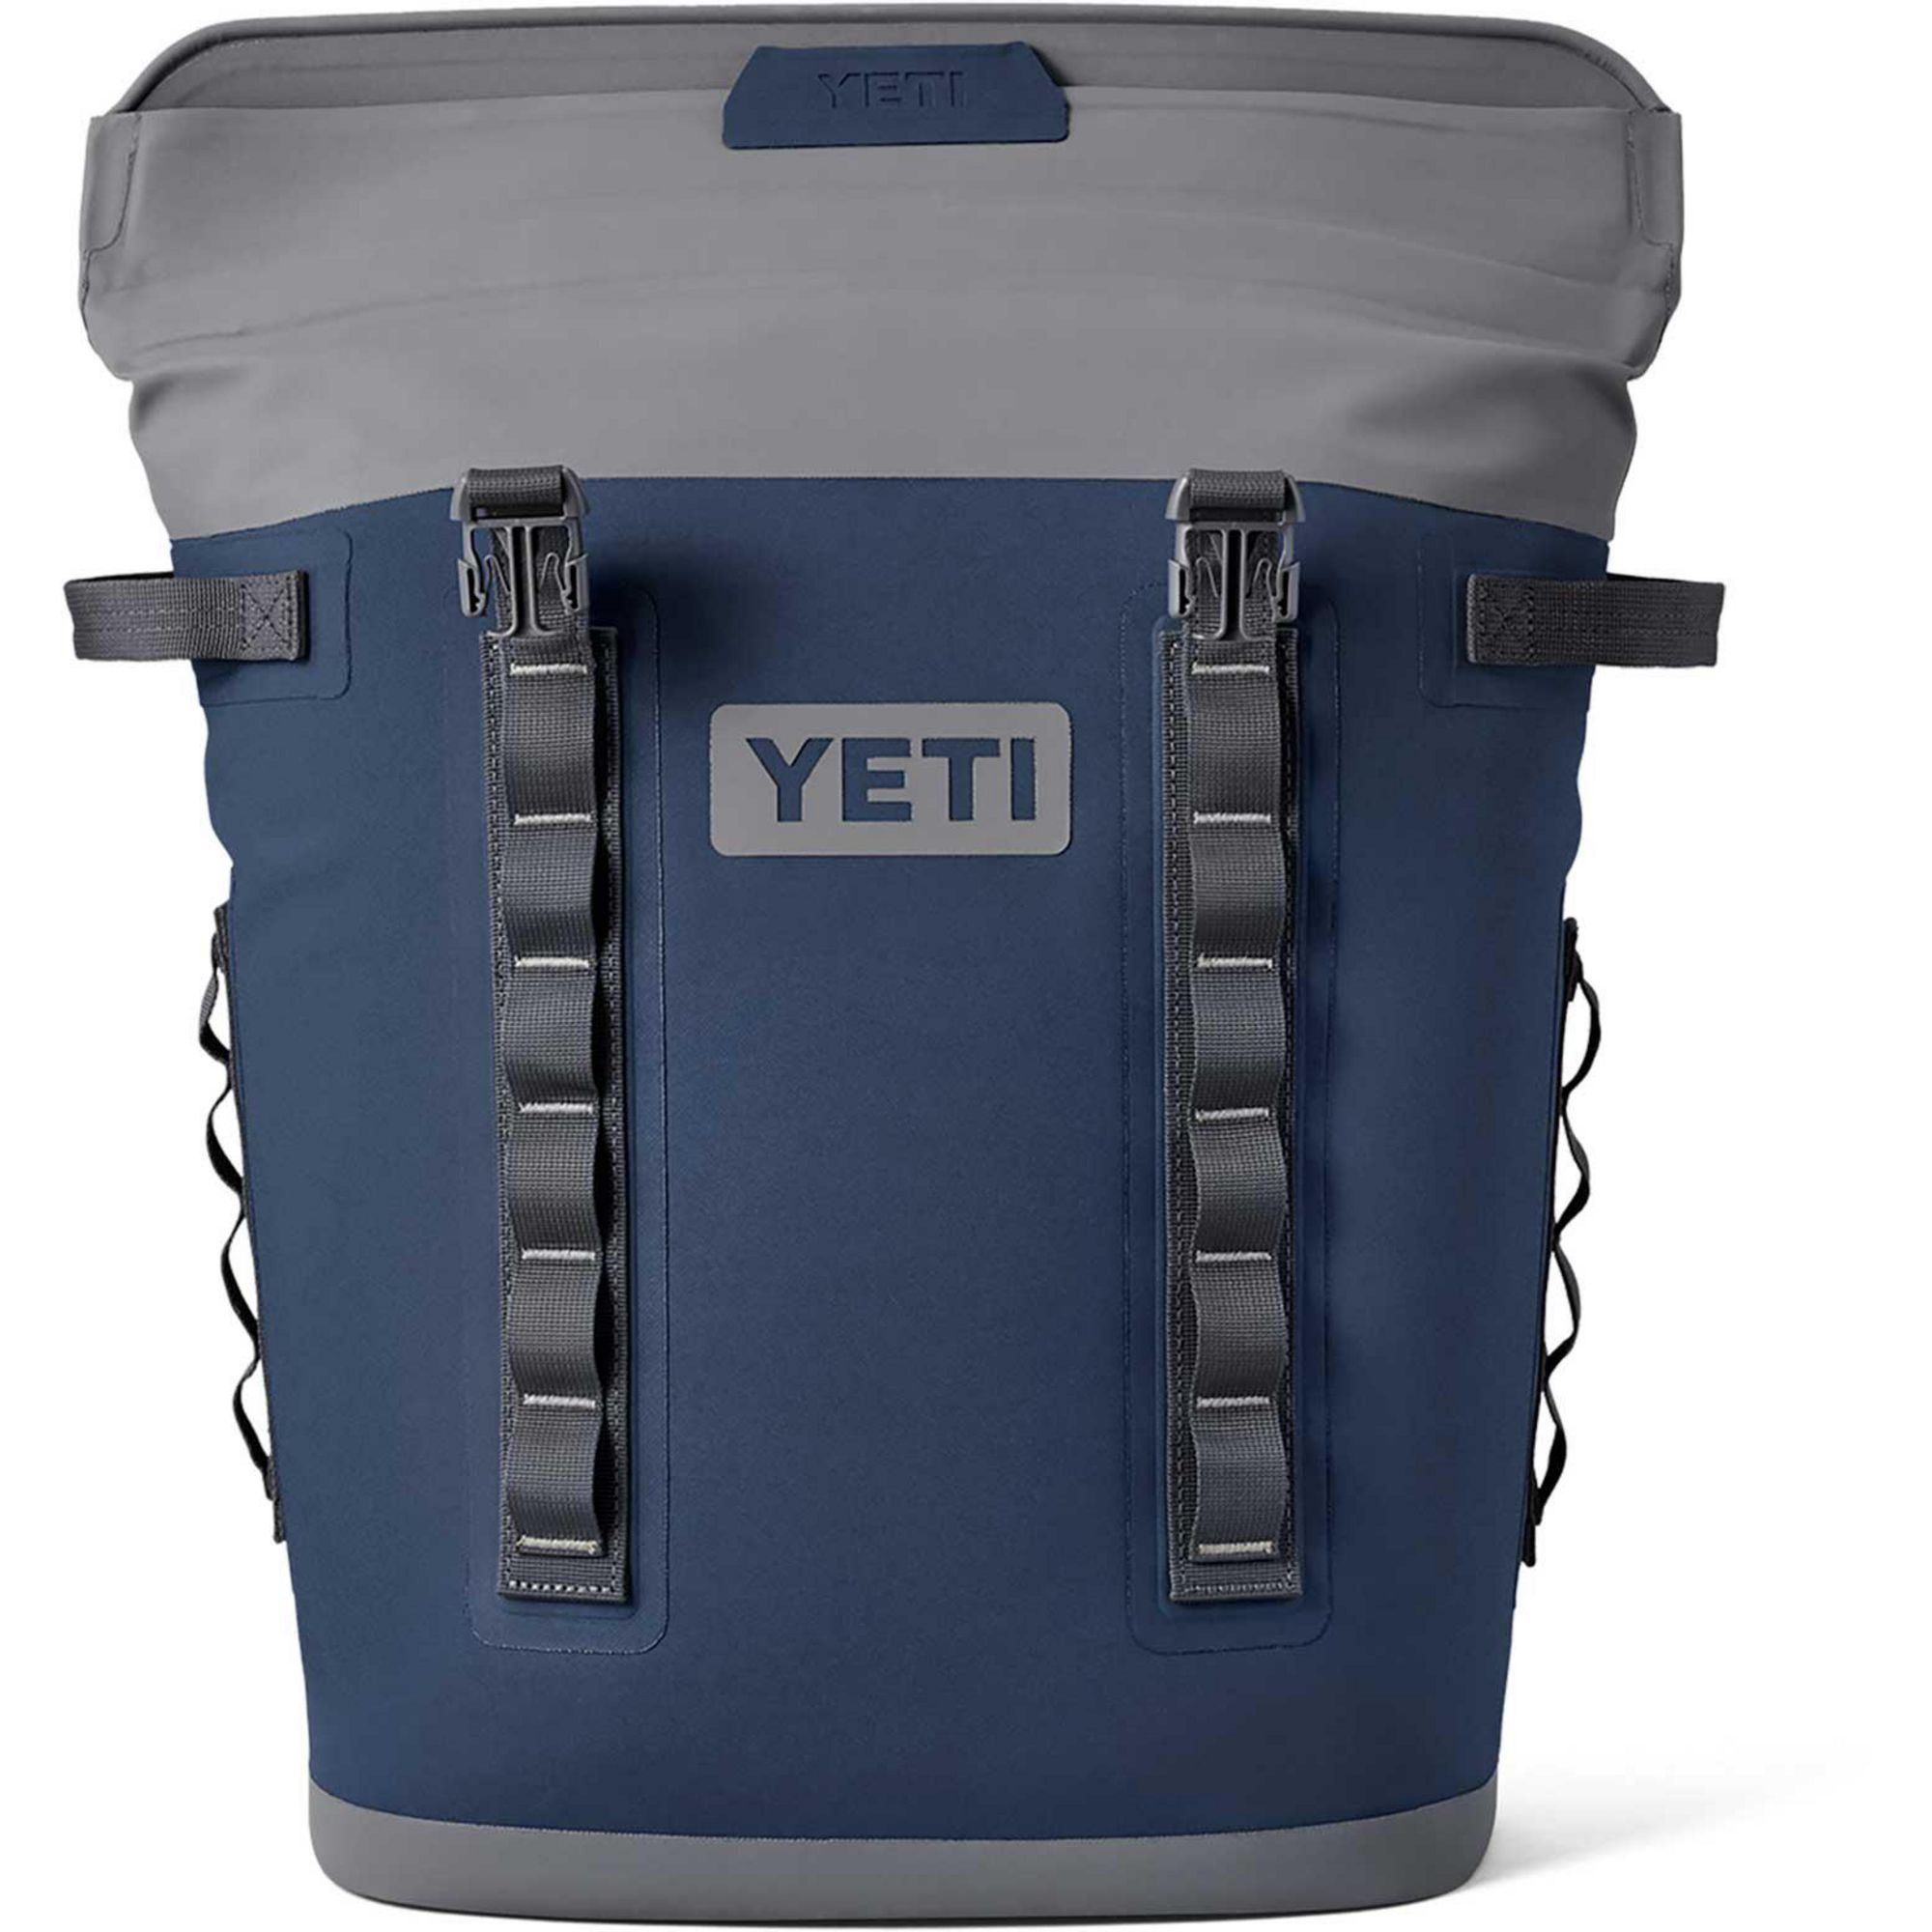 Yeti Hopper 20 Cooler Review - Essential Gear For Family Travel